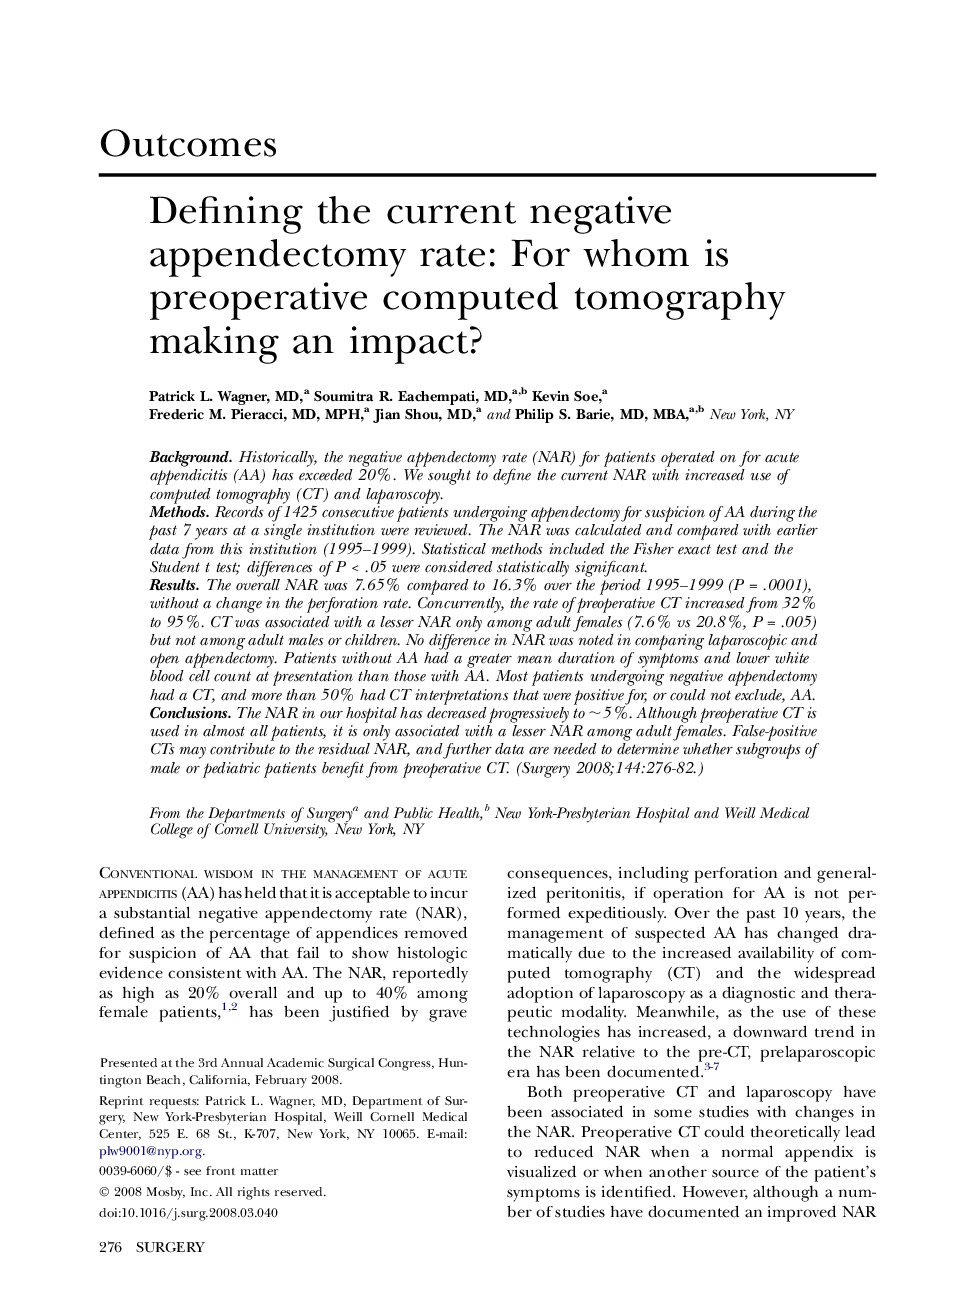 Defining the current negative appendectomy rate: For whom is preoperative computed tomography making an impact? 